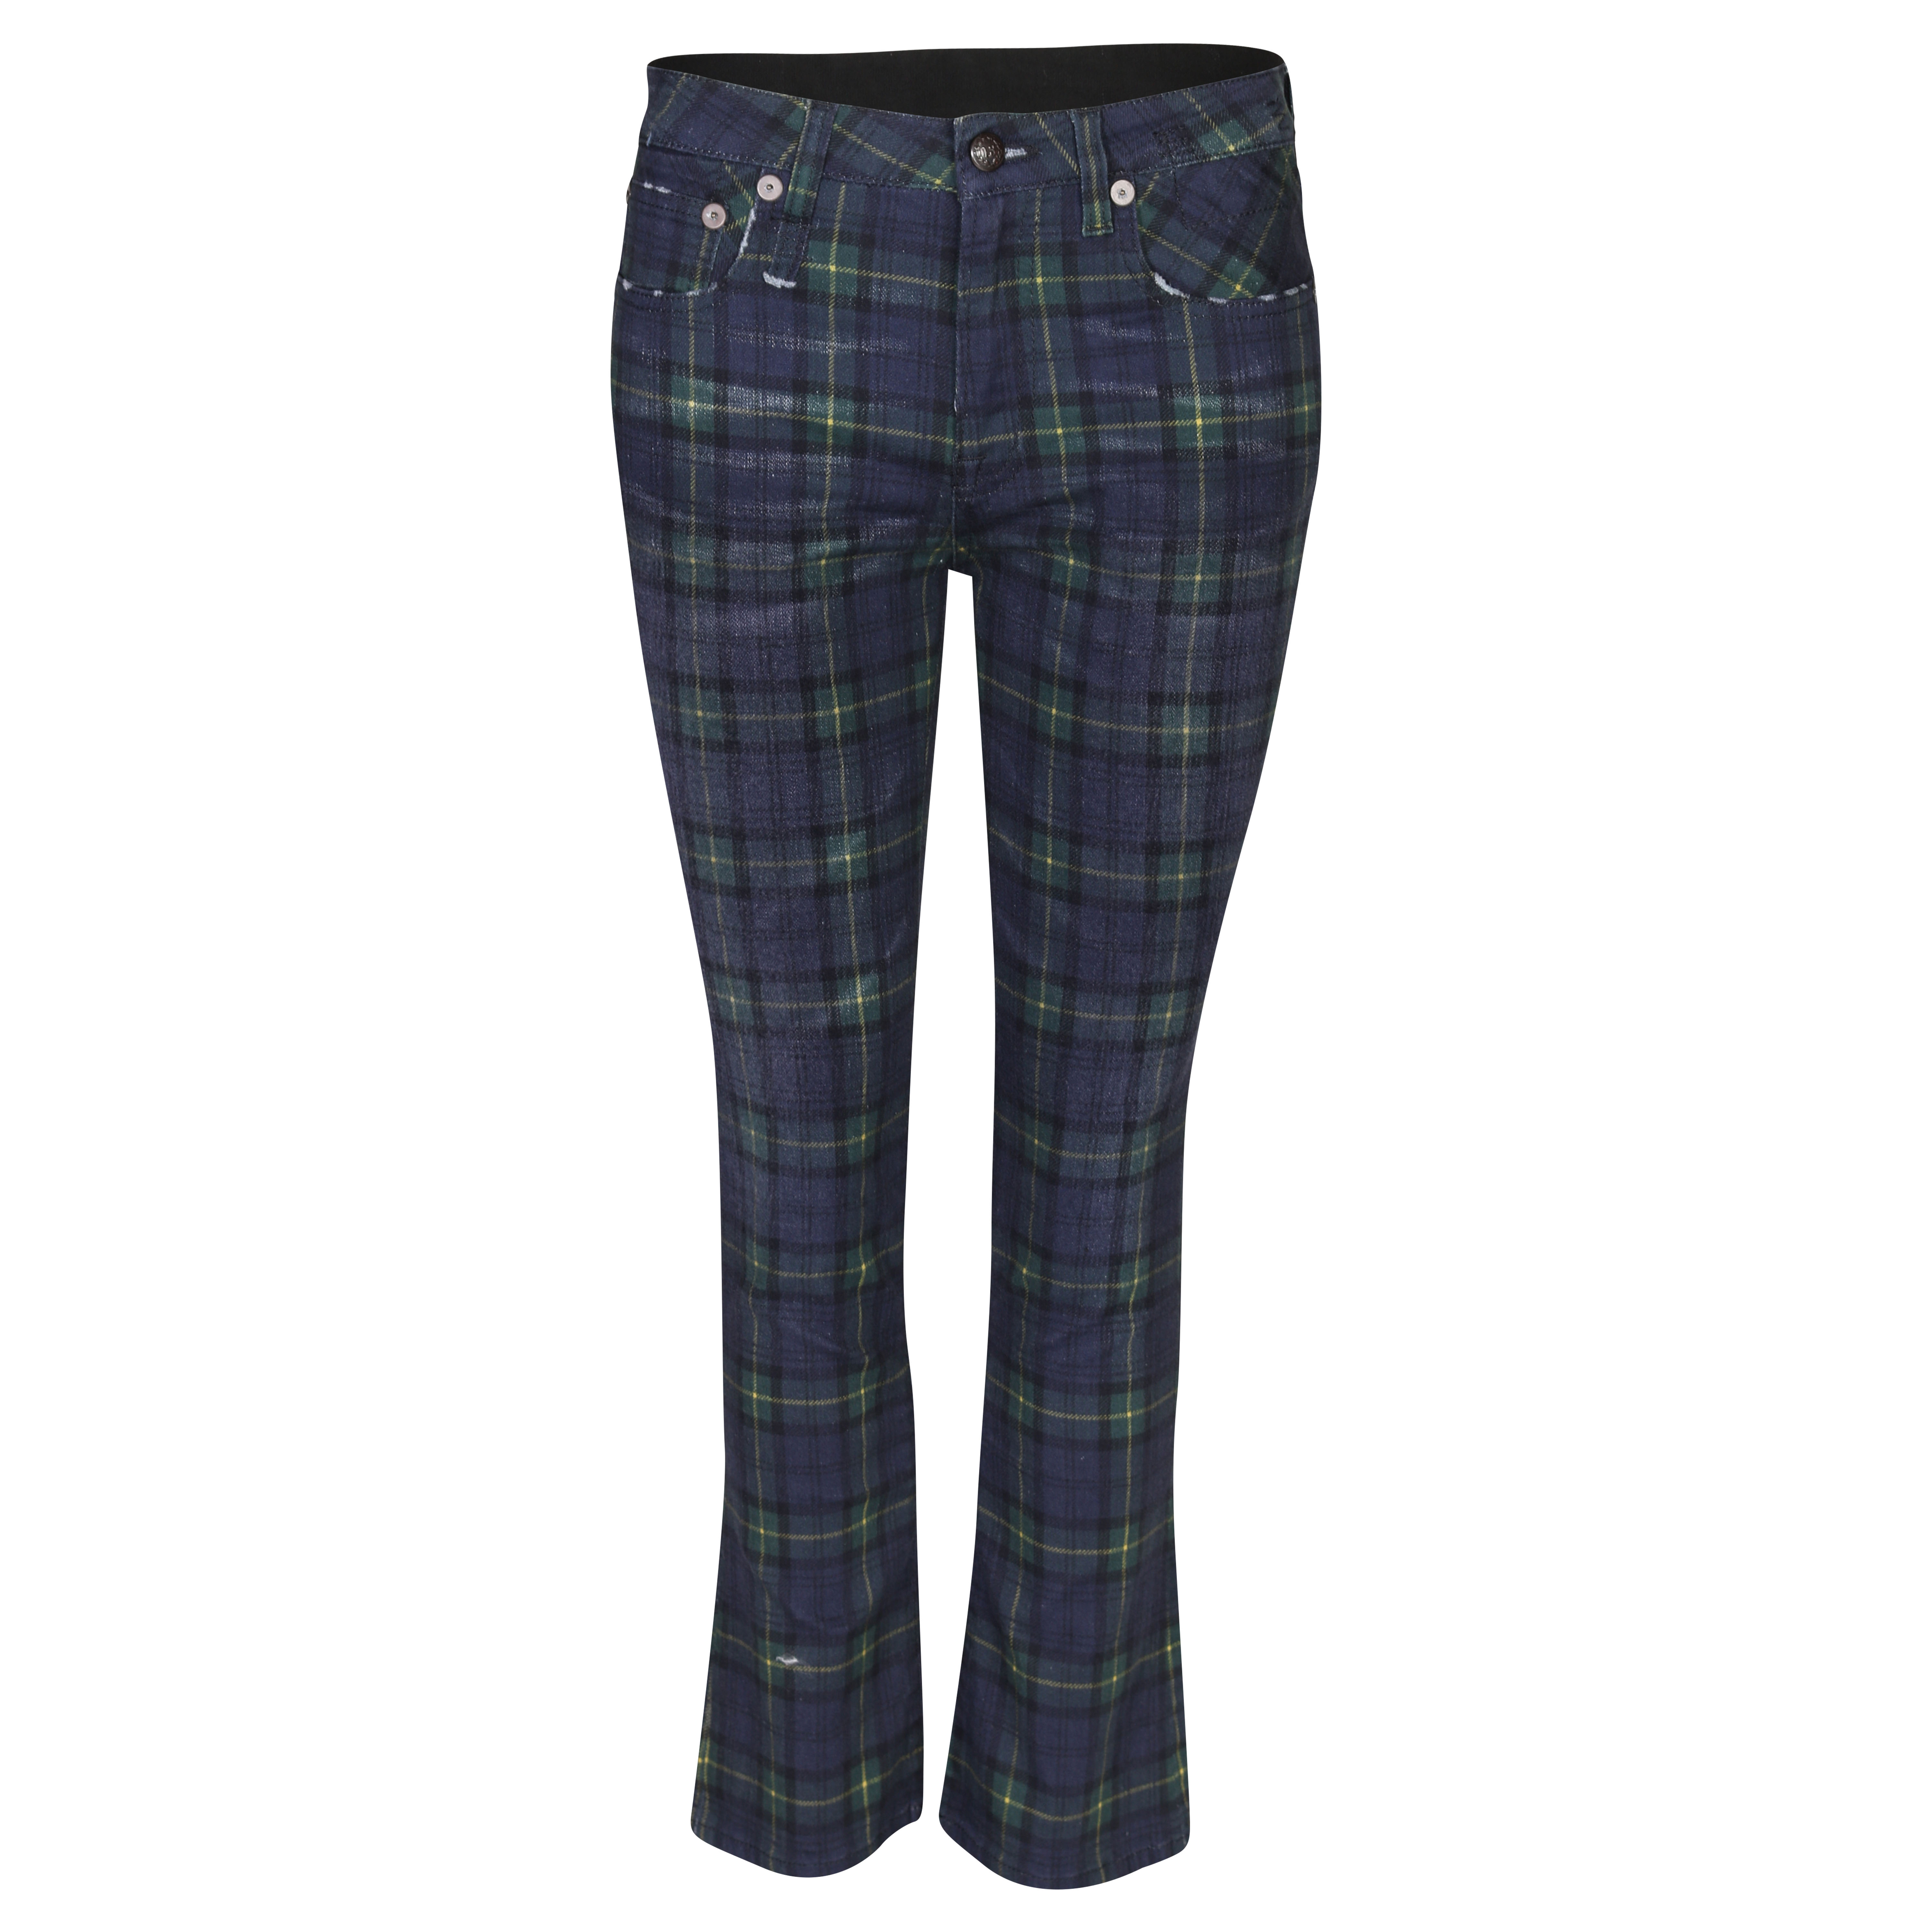 R13 Kick Fit Jeans in Green Check